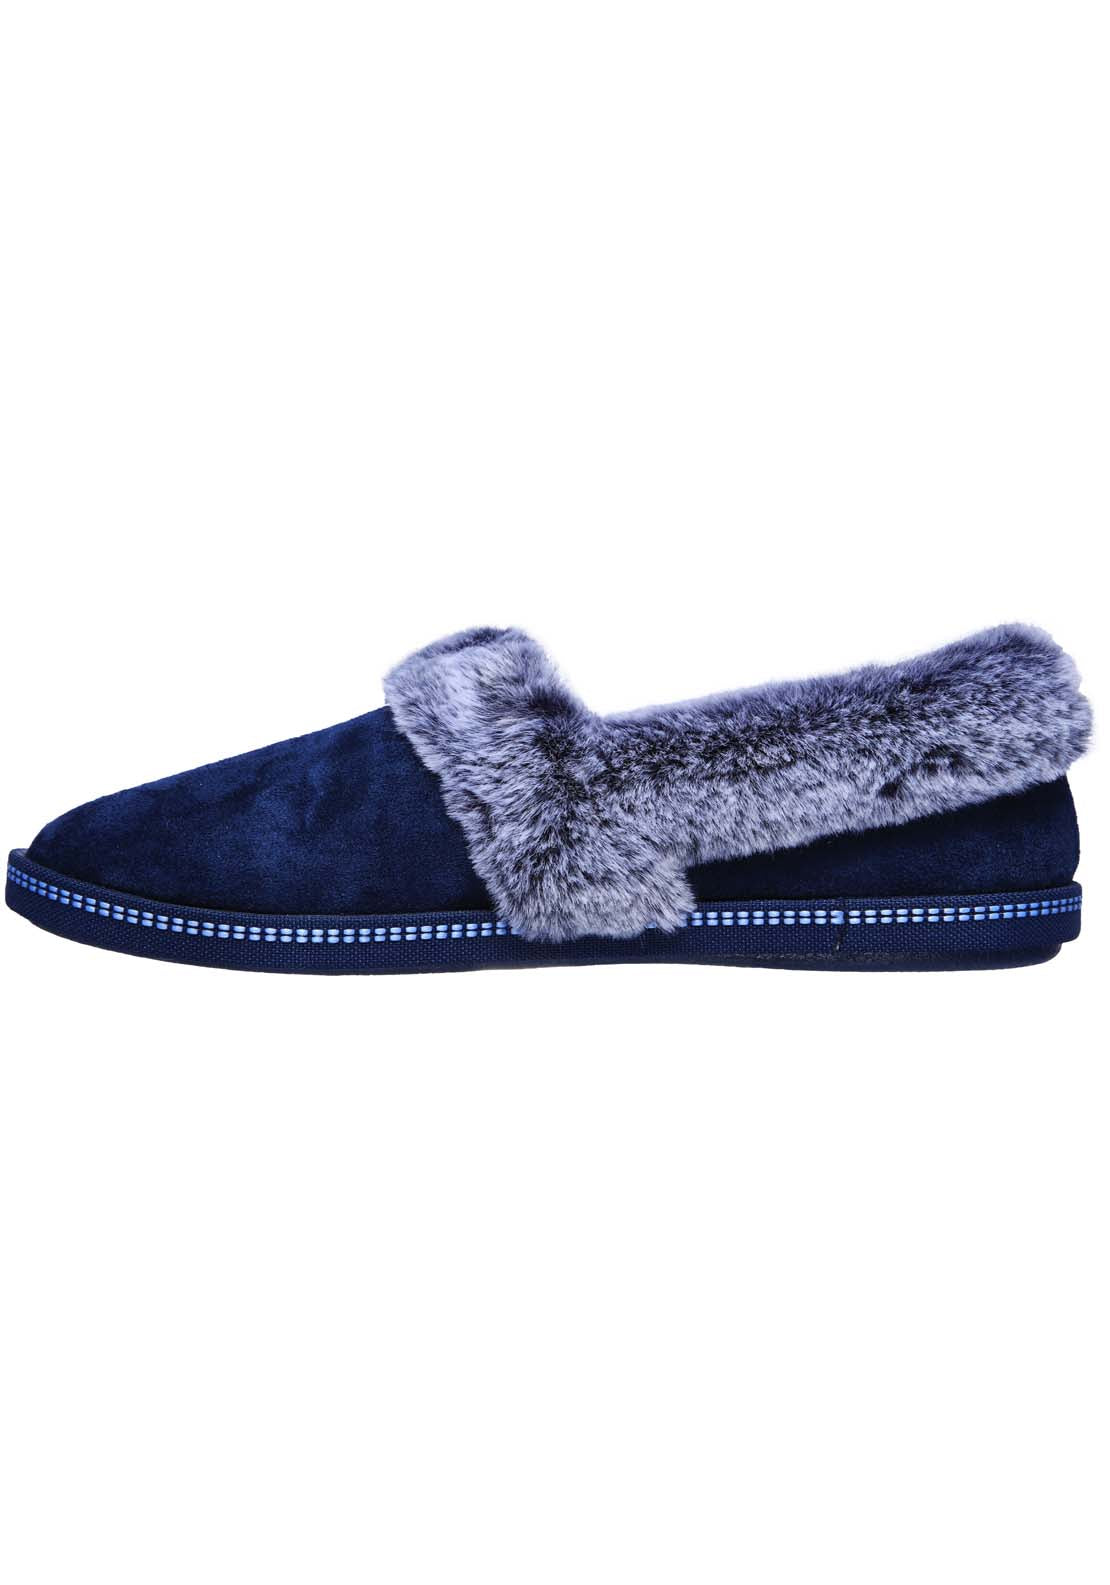 Skechers Cosy Campfire Slipper - Navy 3 Shaws Department Stores